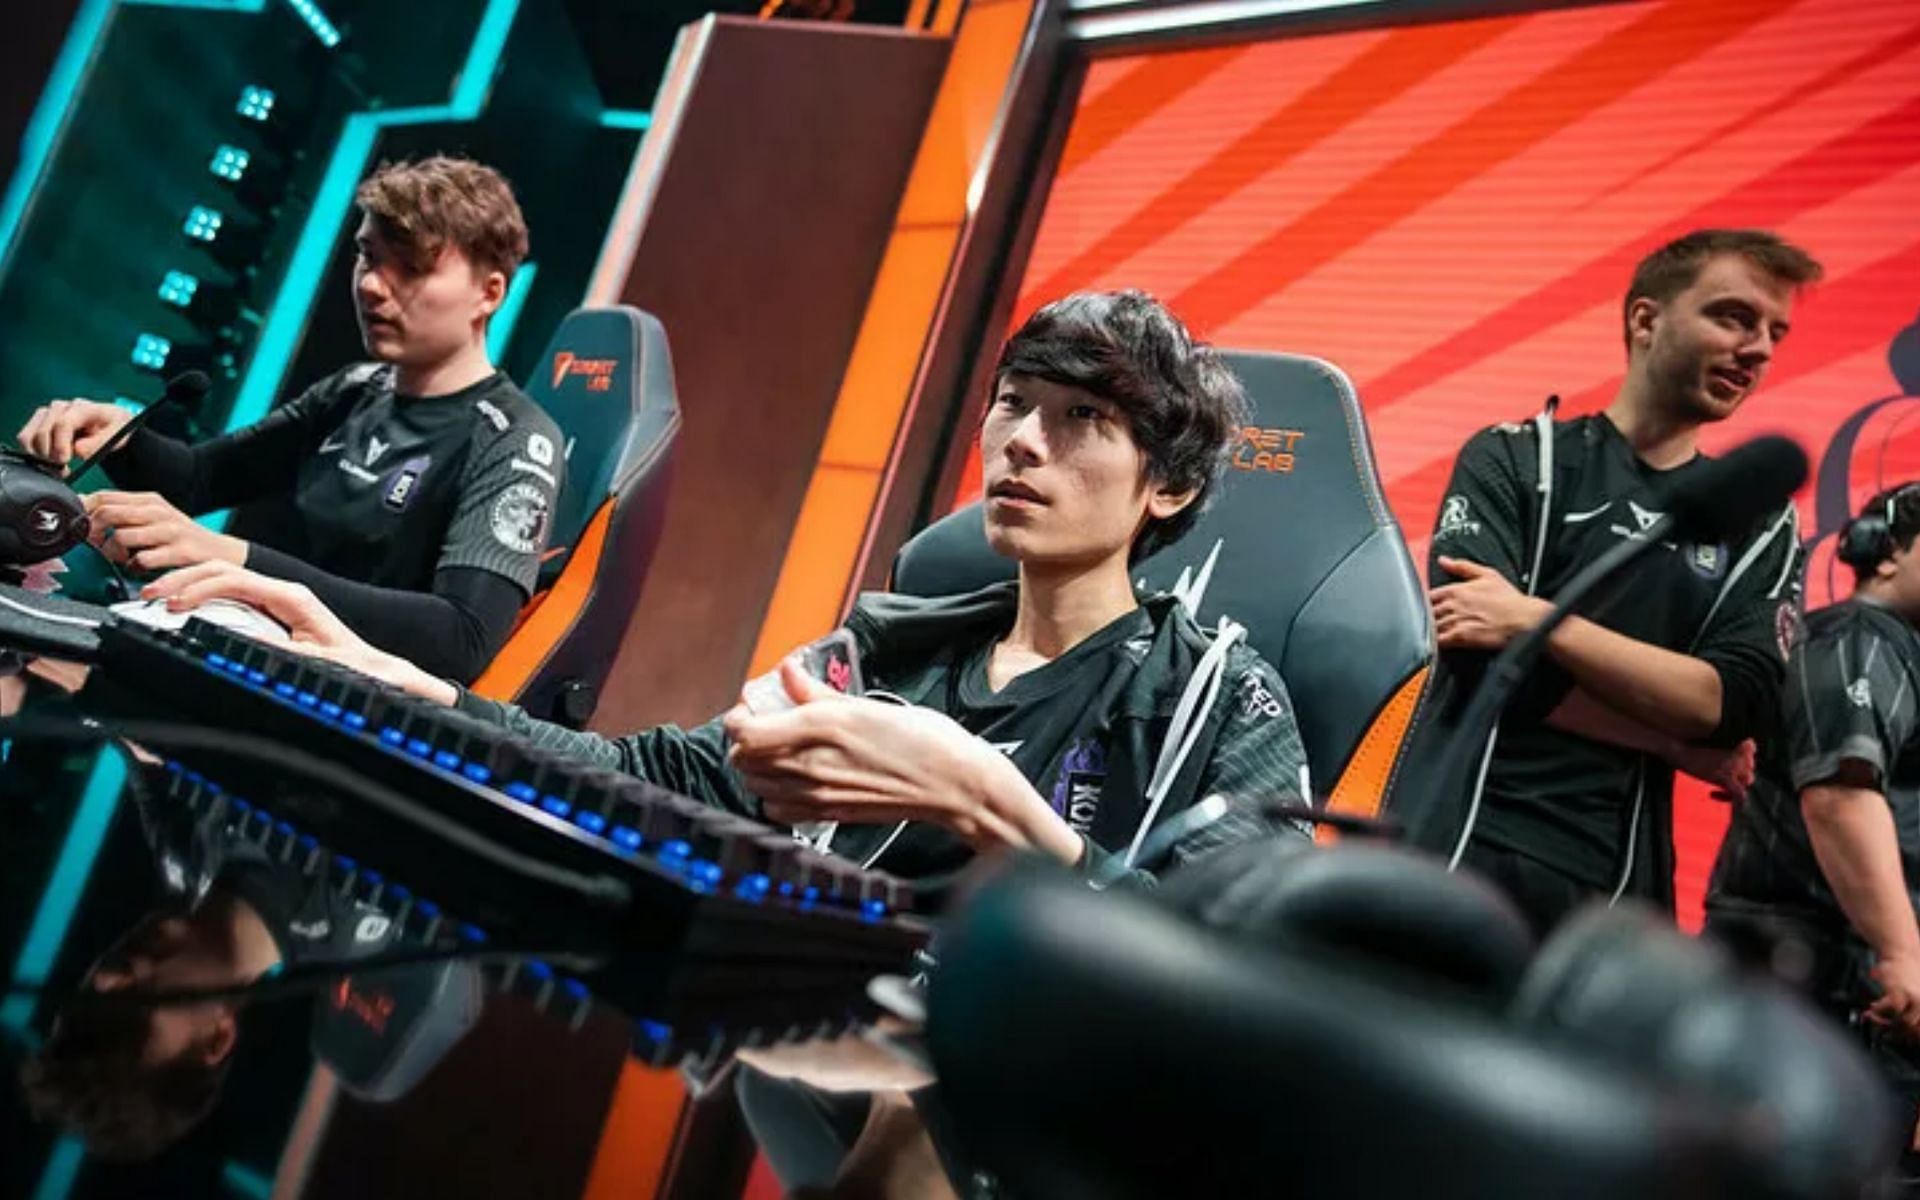 Malrang has a good chance to qualify for the MSI 2023 (Image via Riot Games)